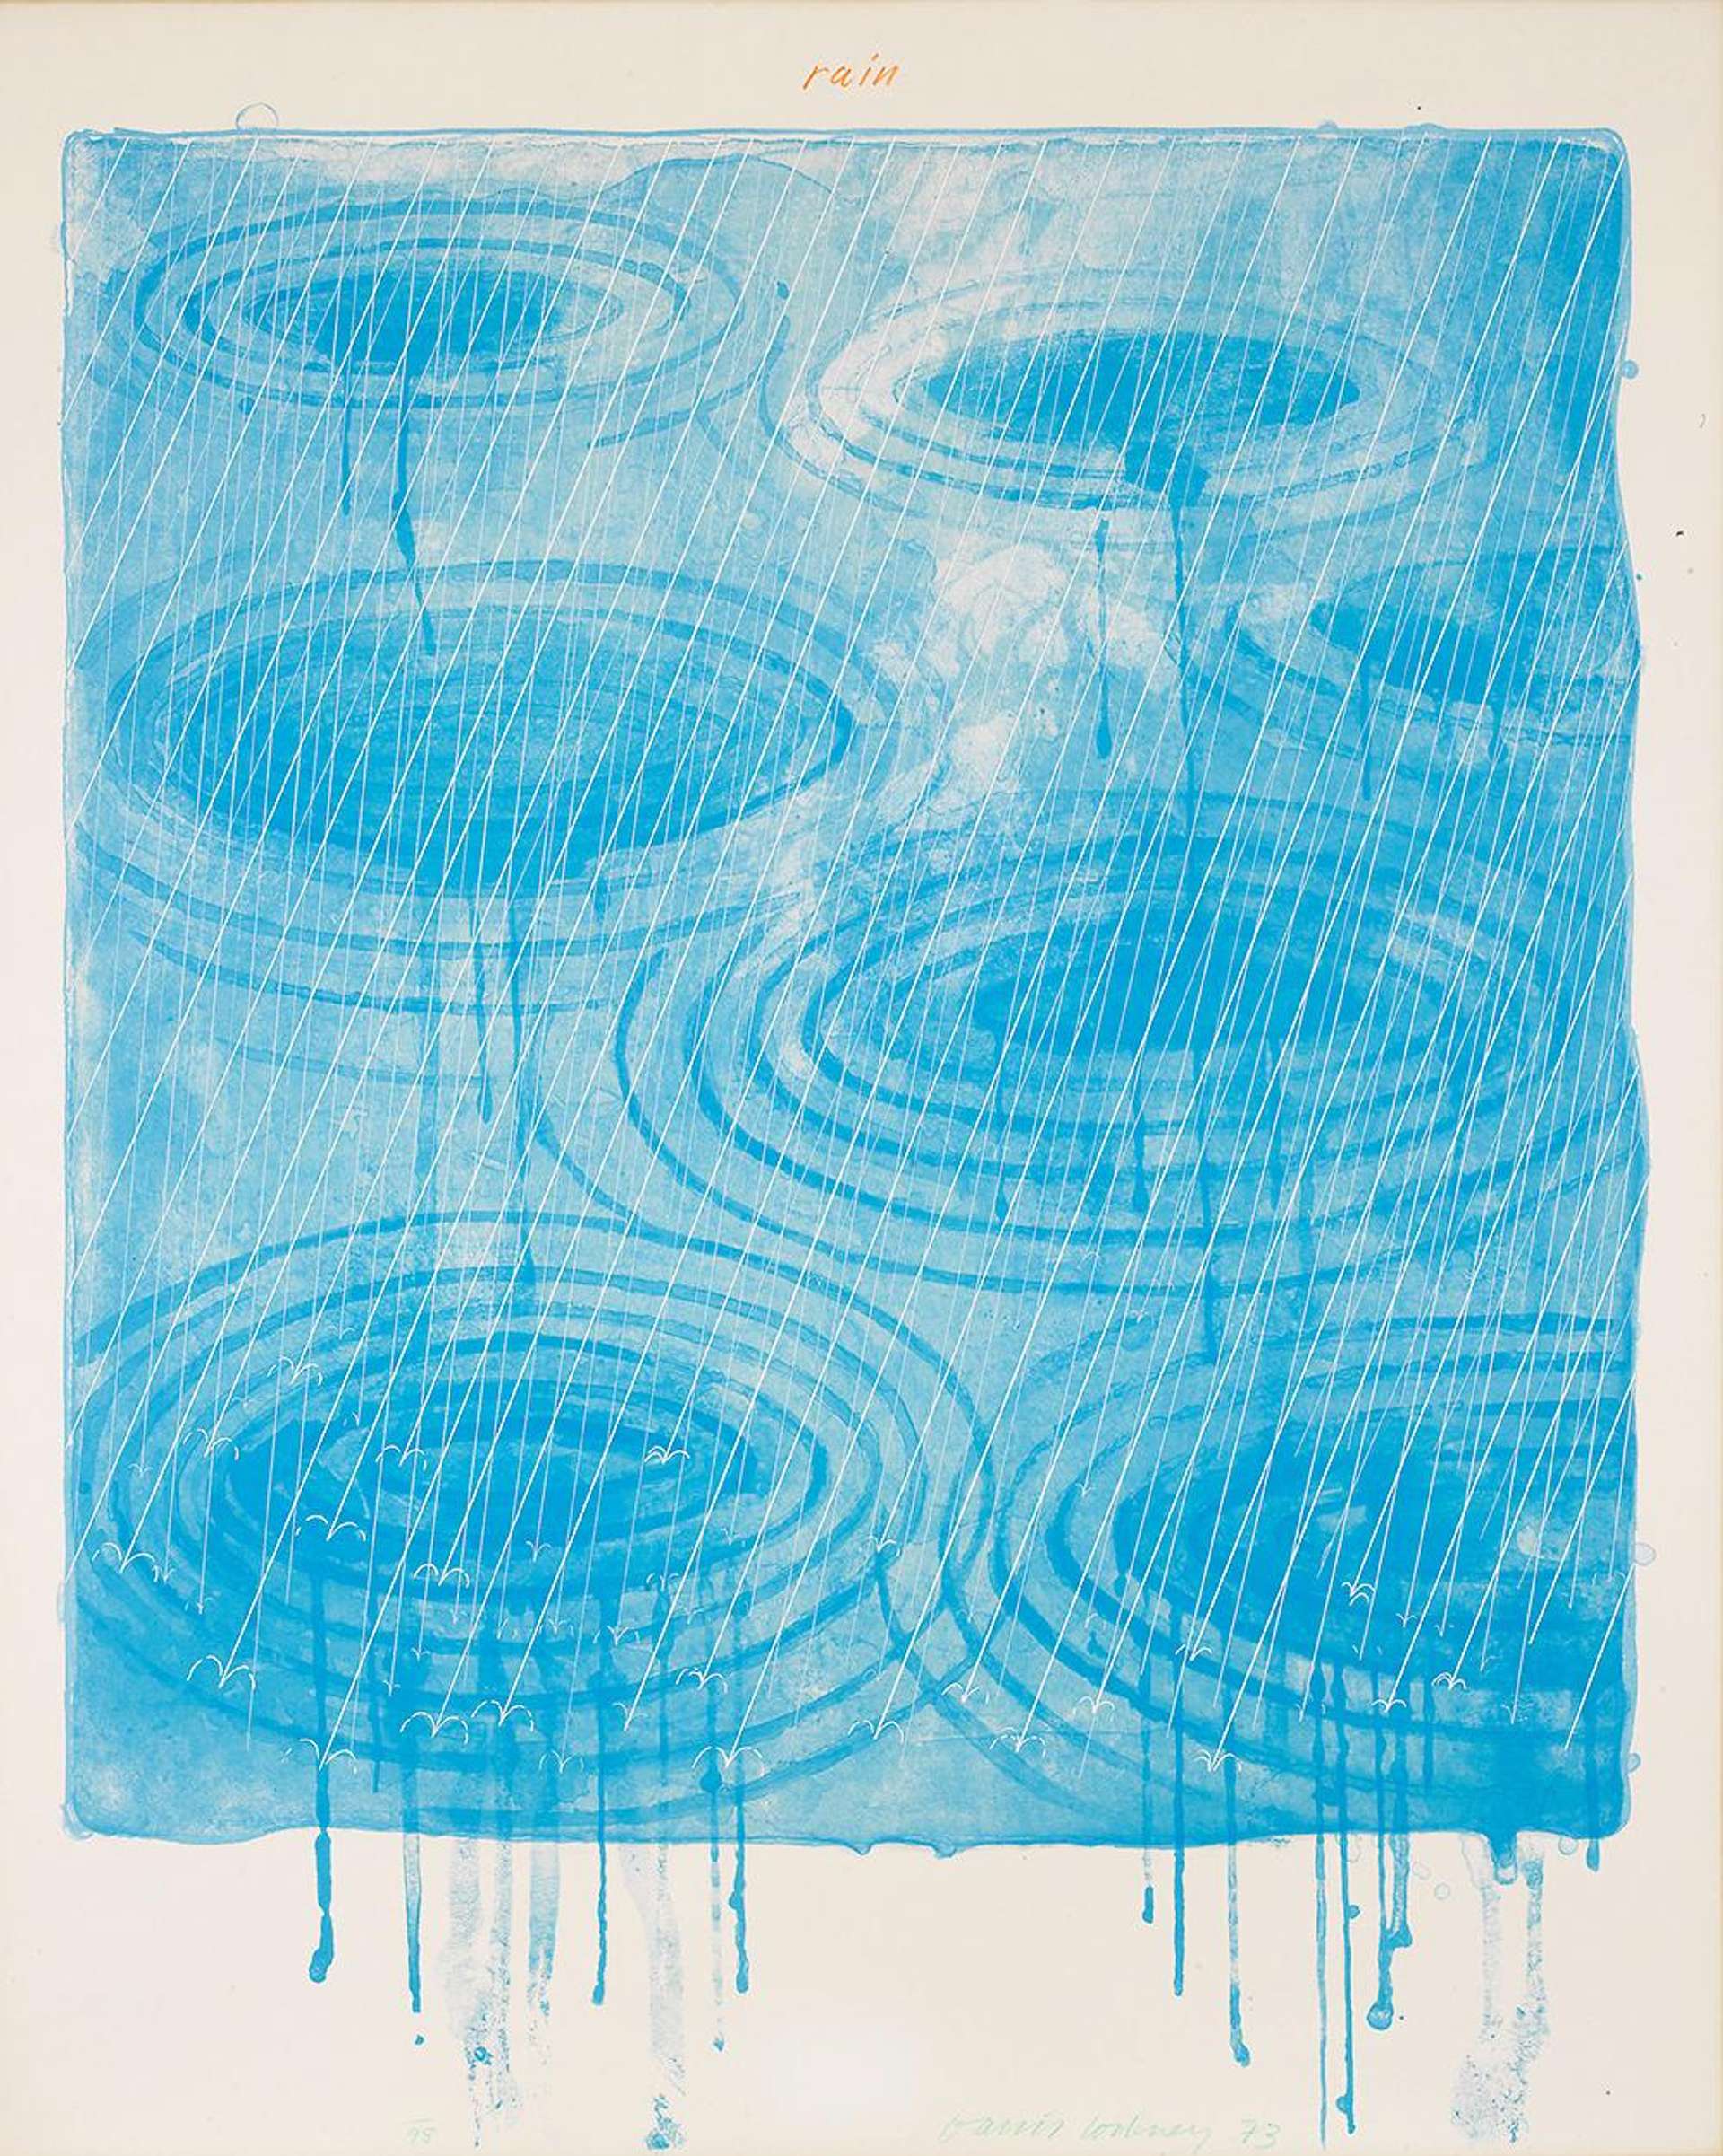 A lithograph by David Hockney depicting blue puddles of rain, delineated with concentric circles, dripping against the paper background.